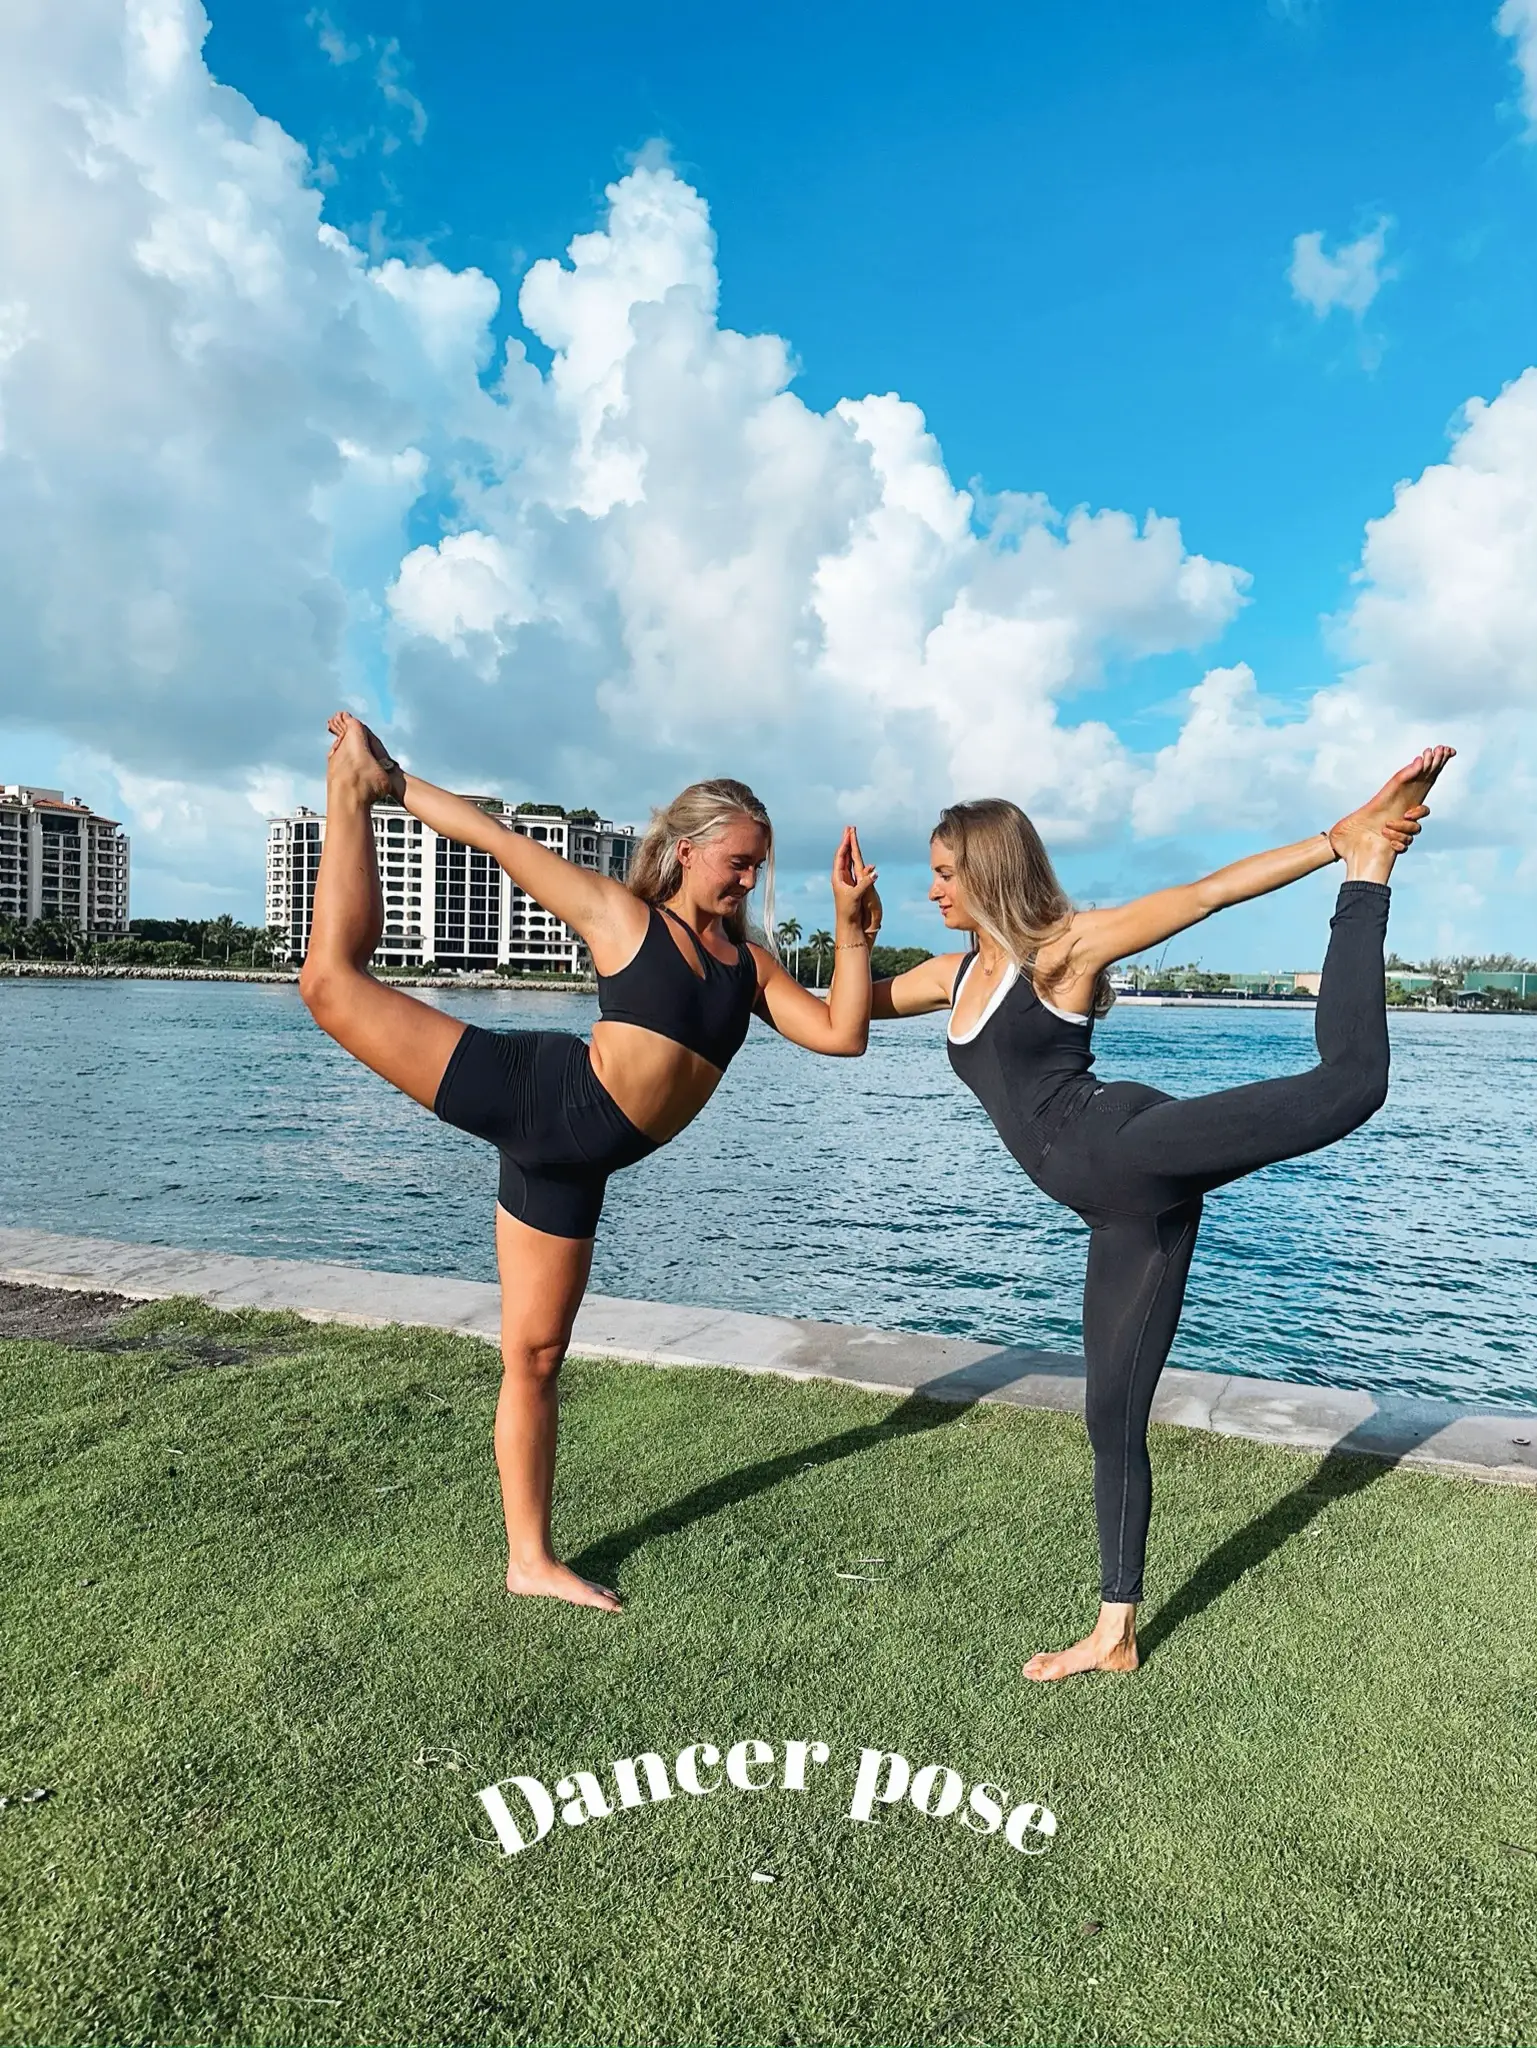 130 Yoga Poses for Two People ideas  partner yoga, partner yoga poses, yoga  poses for two